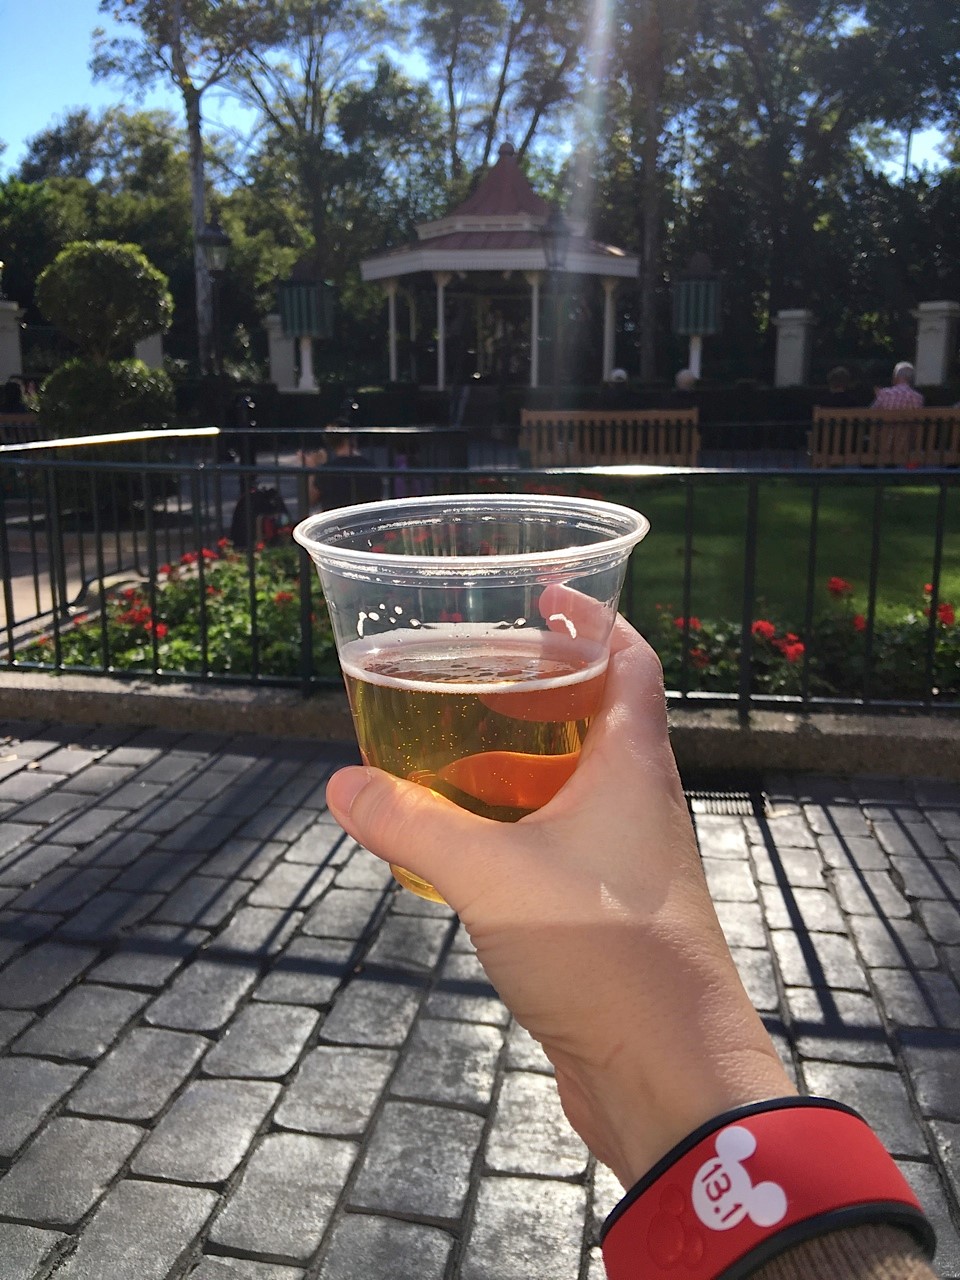 New Alcoholic Drink Options Appearing at Walt Disney World